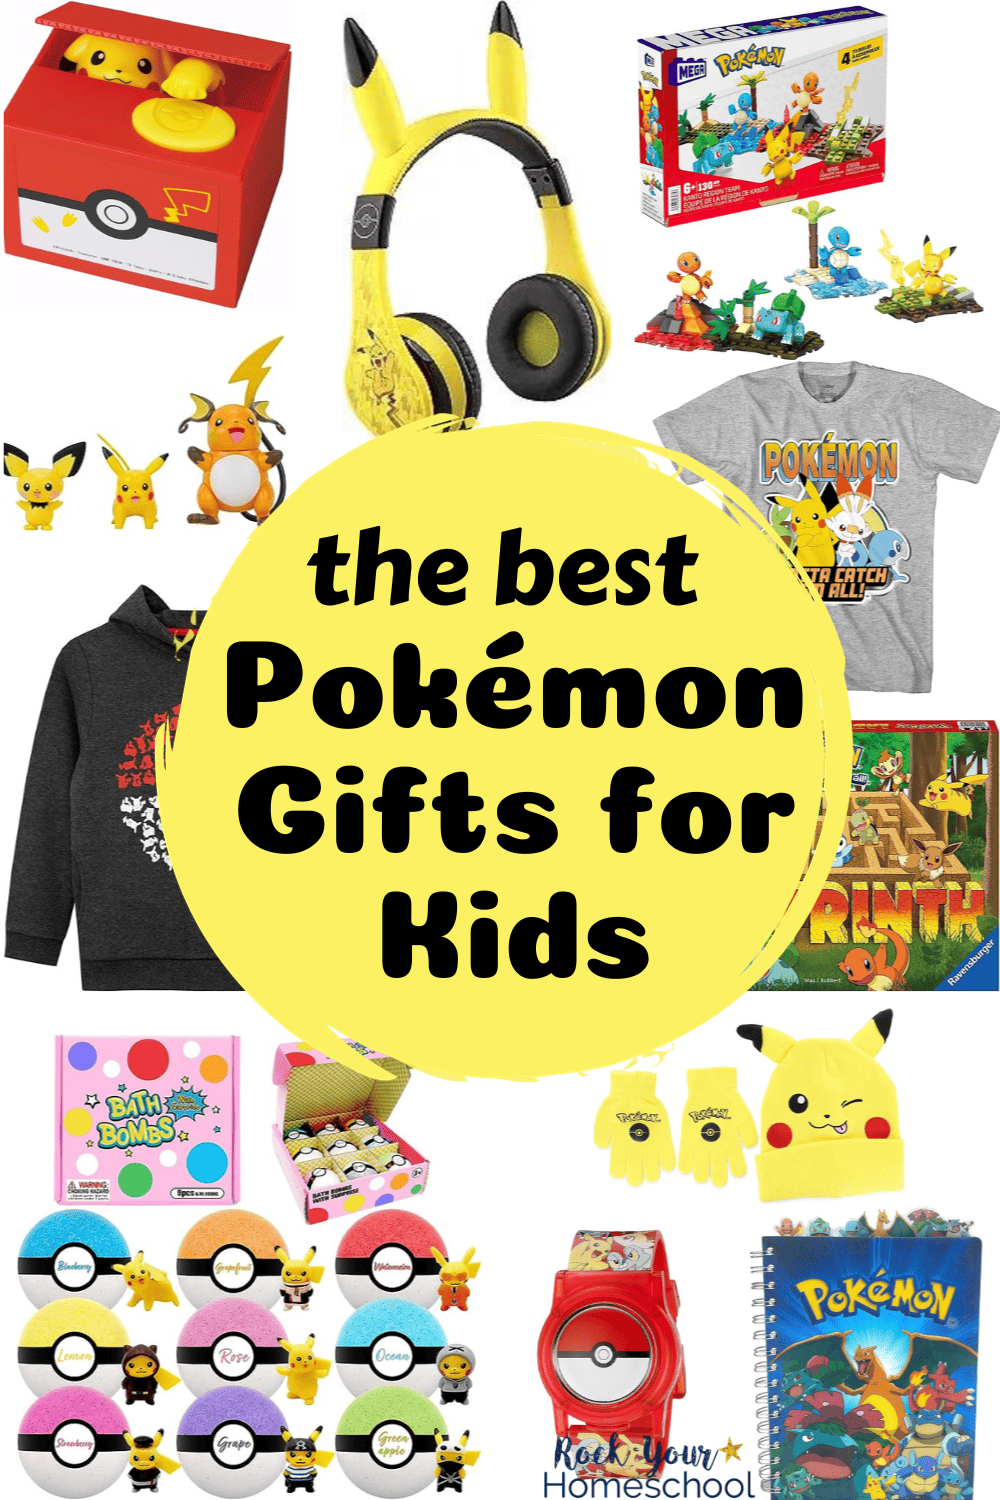 Pokémon Gifts for Kids: 20 Perfect Ideas That Your Fans Will Love